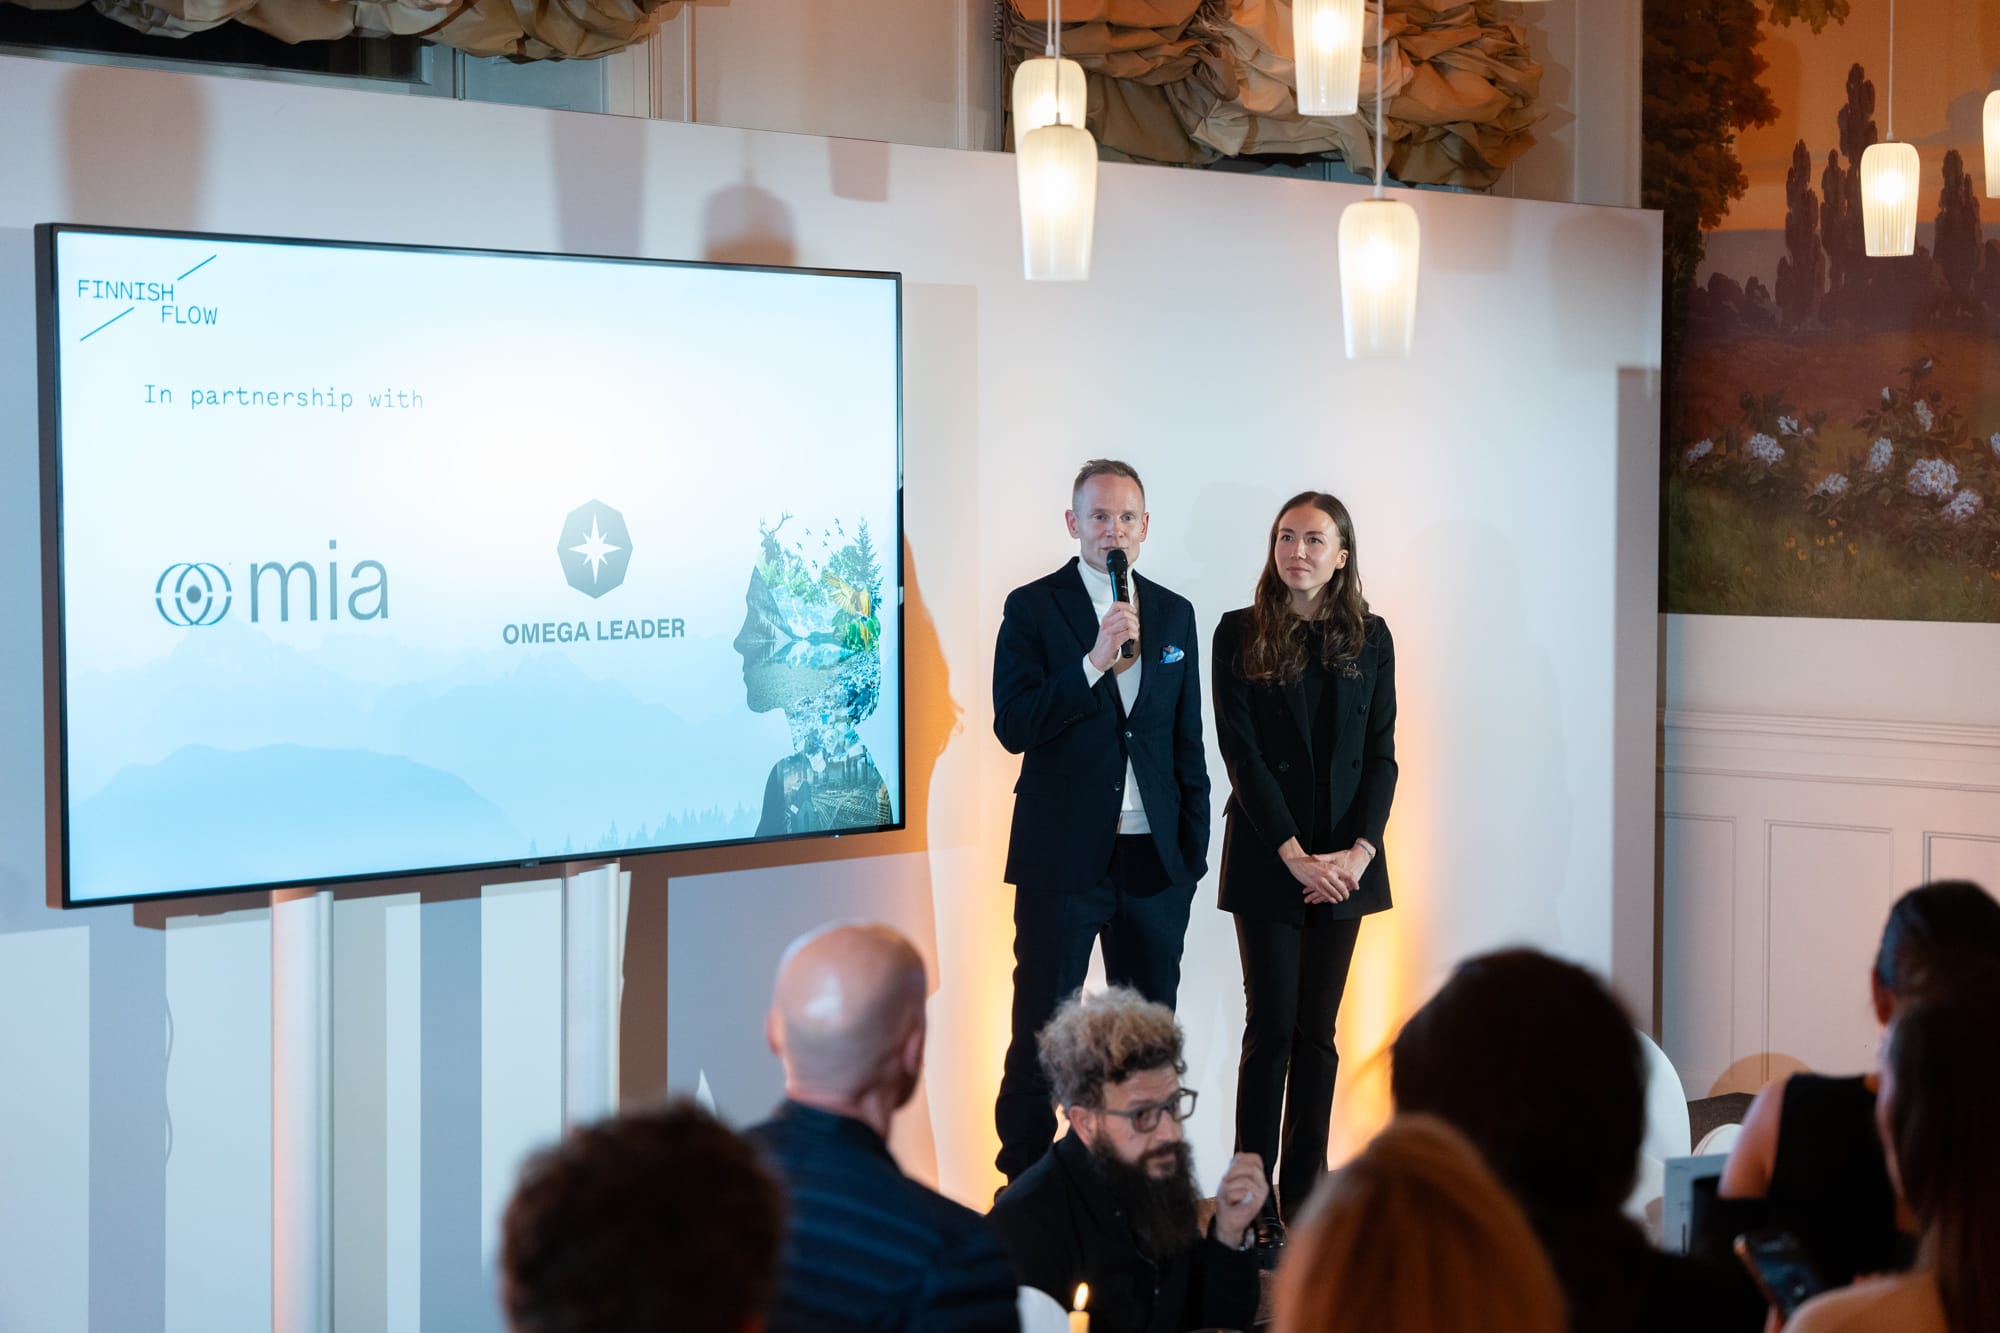 Mia Partners with Finnish Flow at their Annual Davos Event